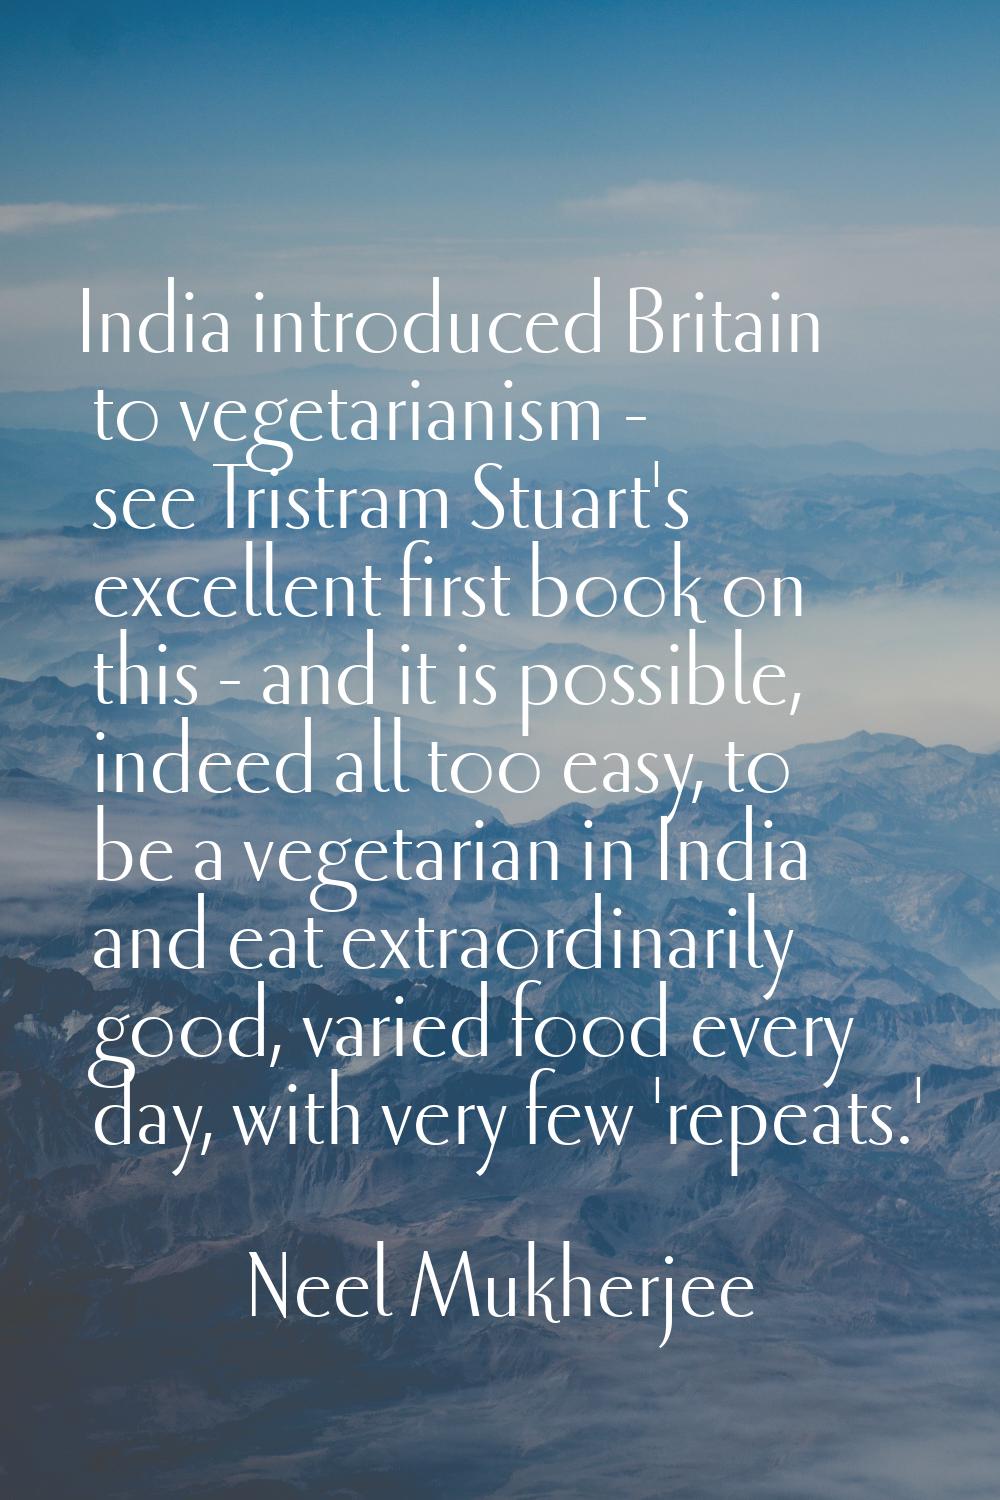 India introduced Britain to vegetarianism - see Tristram Stuart's excellent first book on this - an